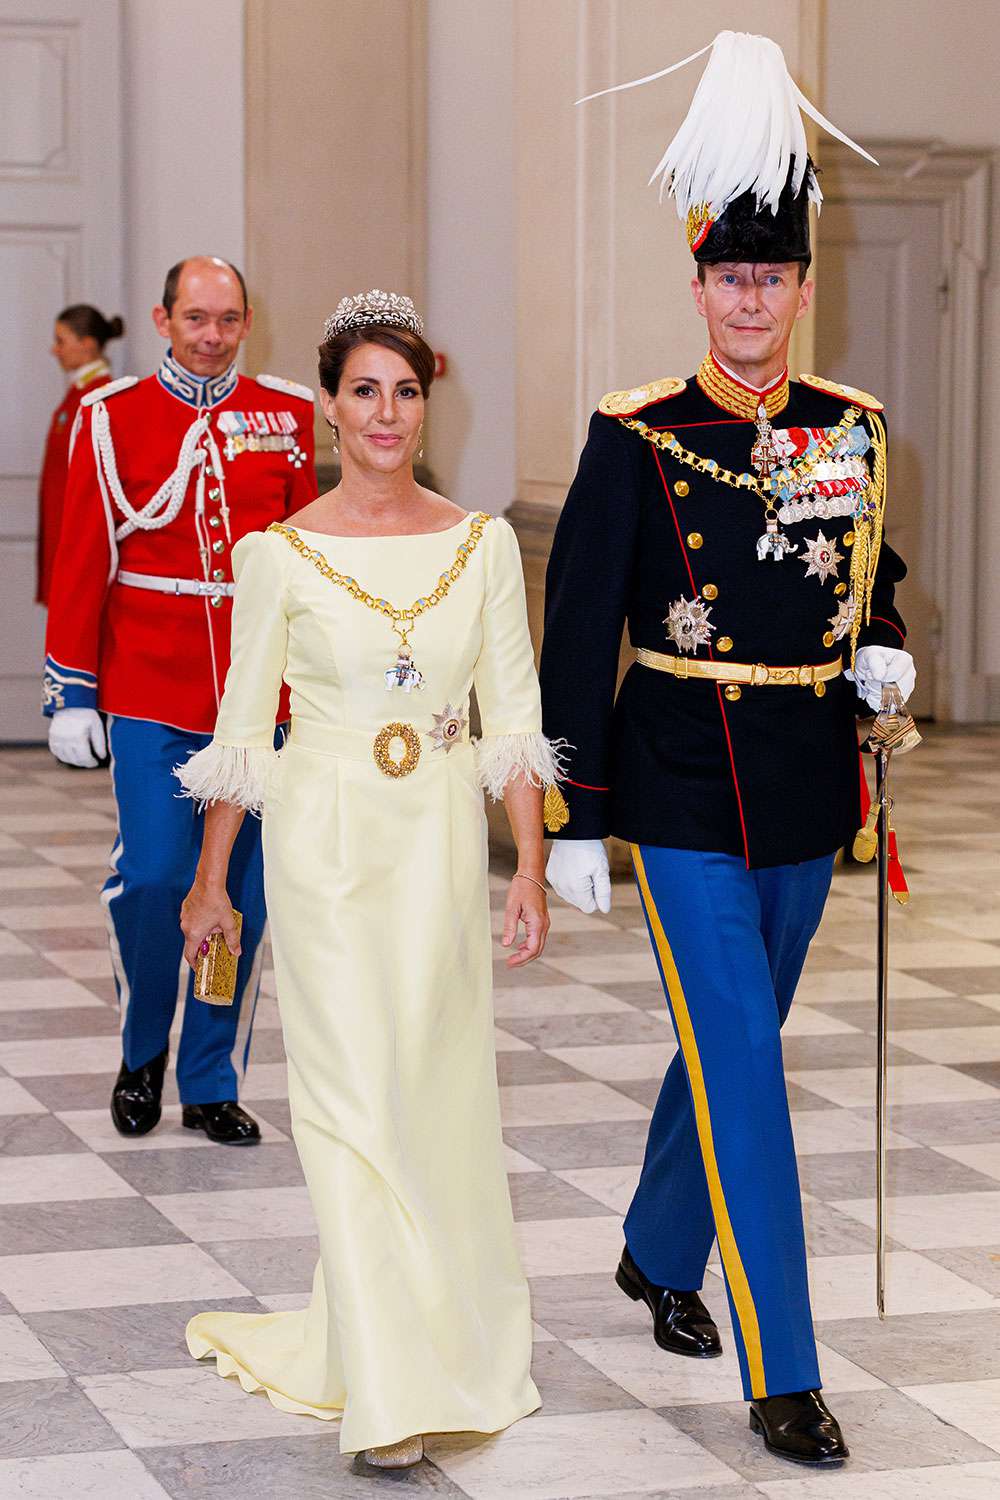 Prince Joachim of Denmark and Princess Marie of Denmark at Christiansborg palace for the gala diner during the 50 years anniversary of Her Queen Margrethe II of Denmark accession to the throne on September 10, 2022 in Copenhagen, Denmark.